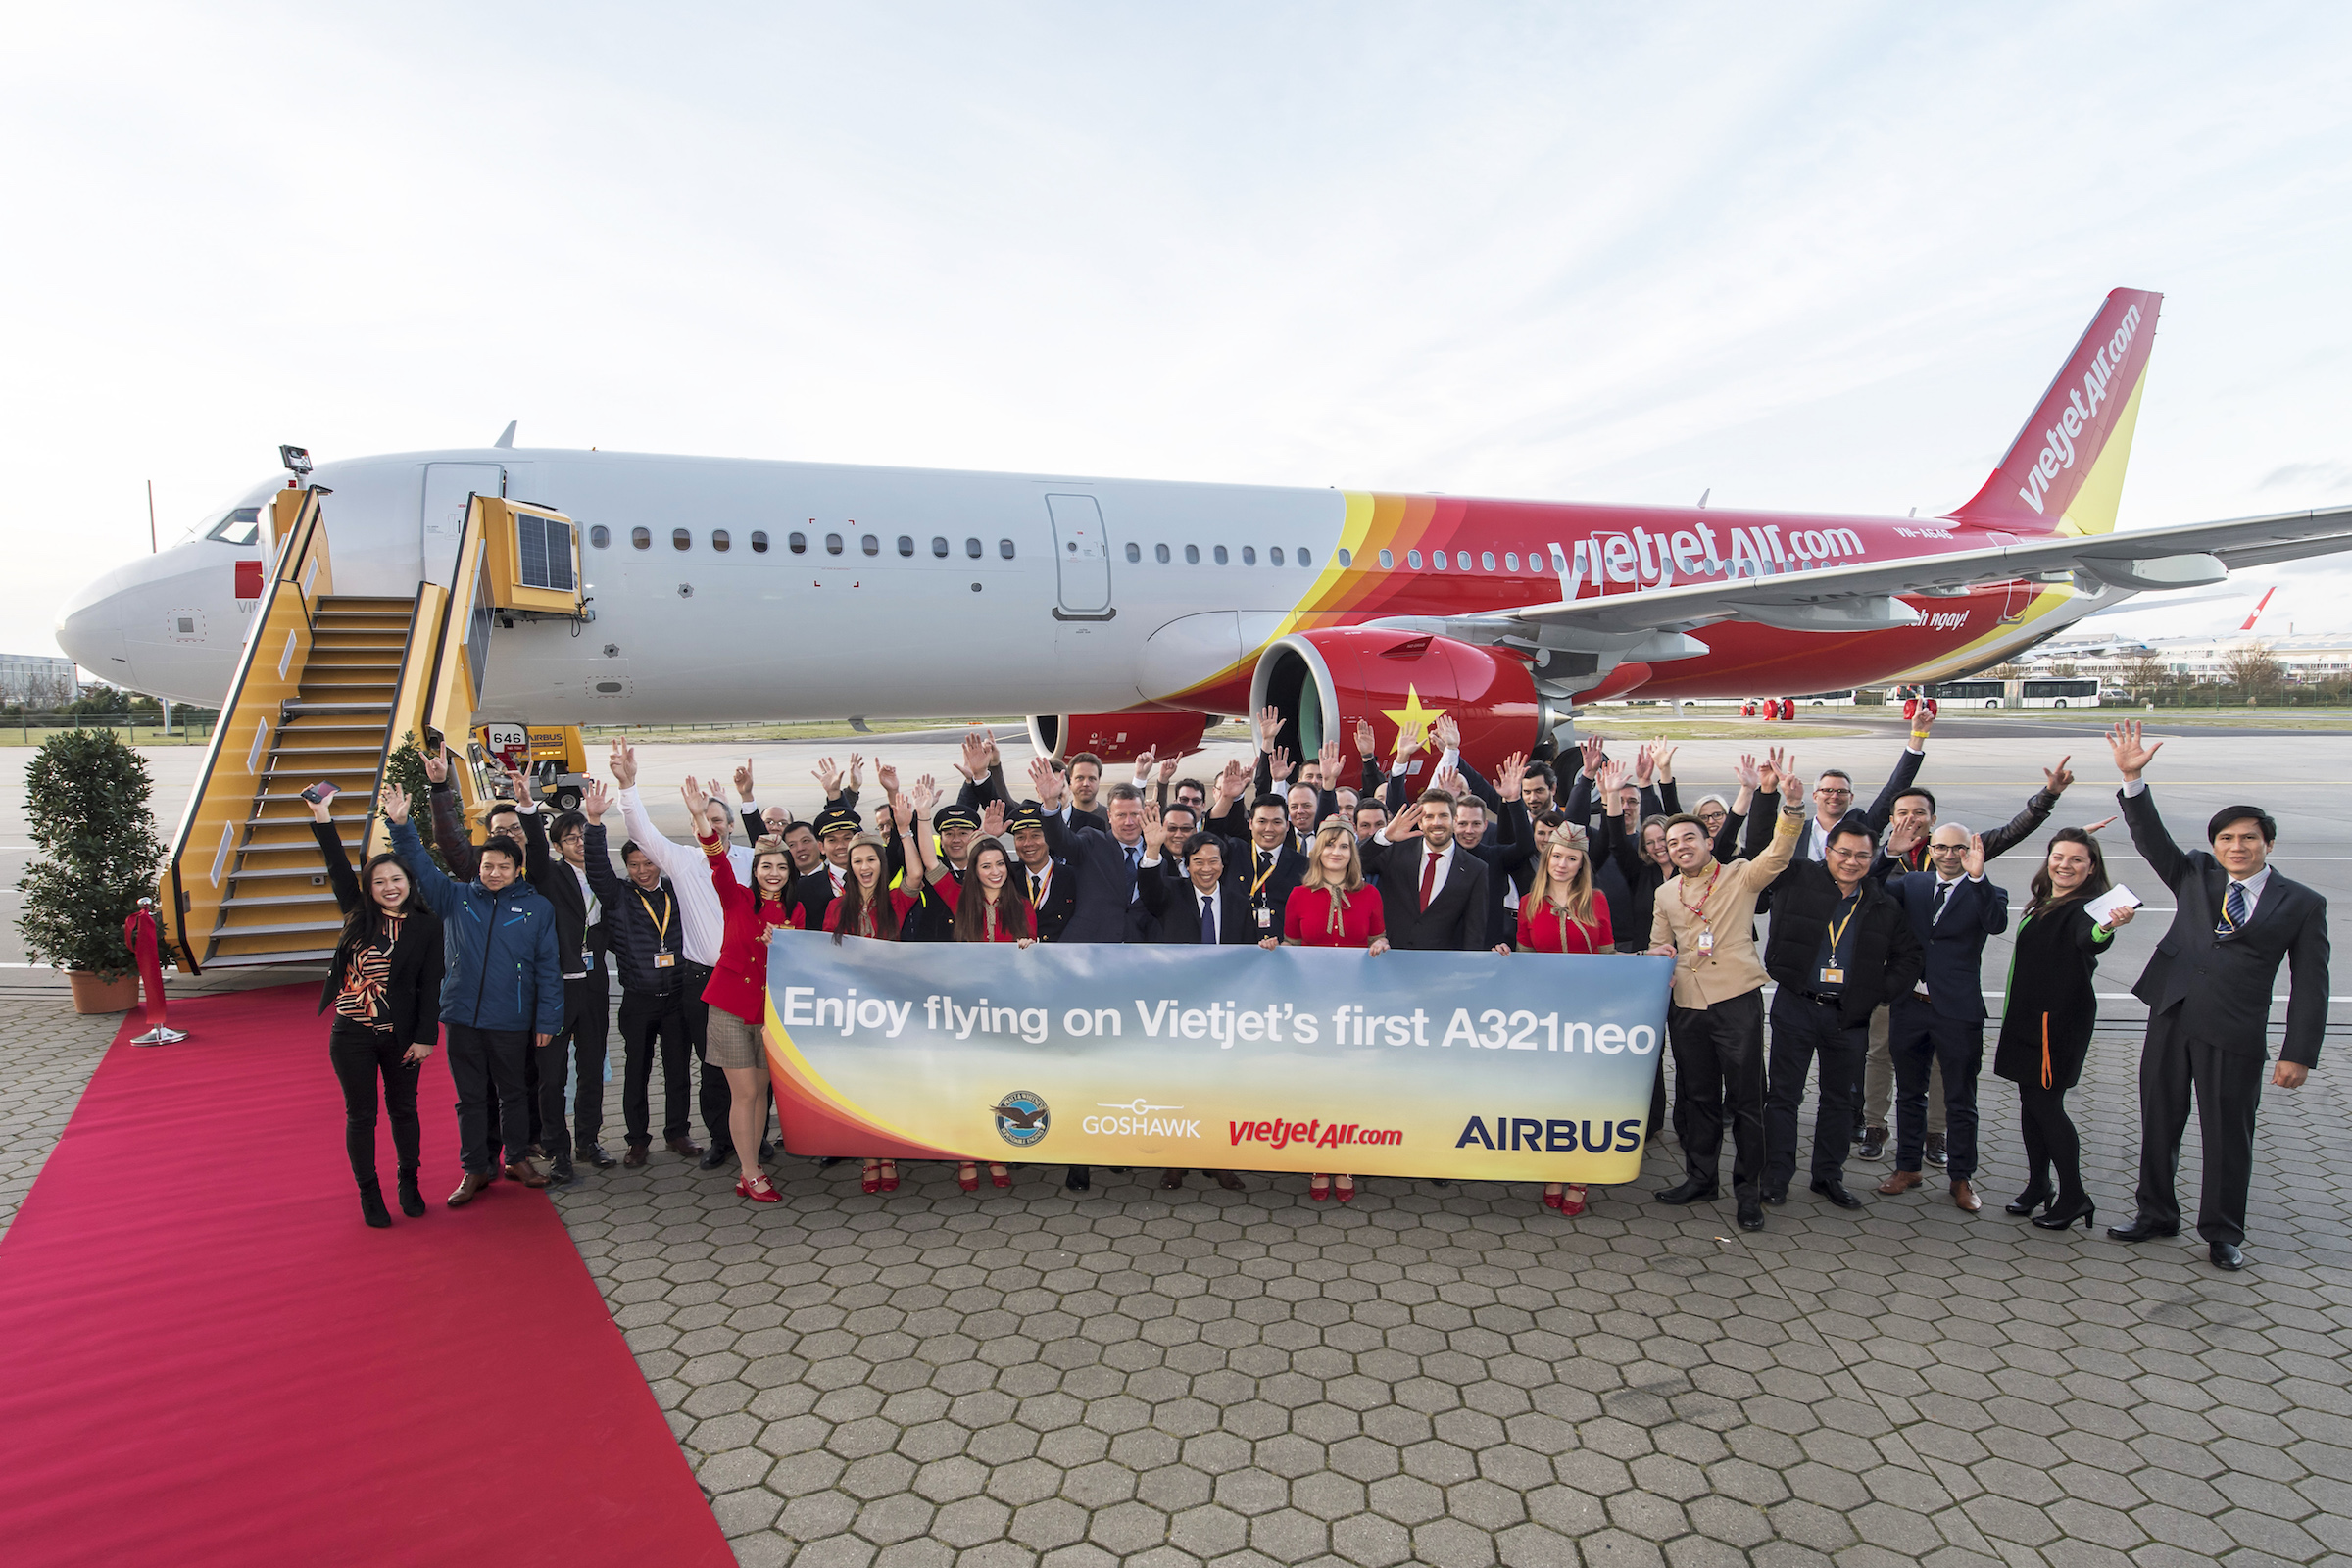 Vietjet has become the first airline in Southeast Asia to take delivery of an A321neo (new engine option) after the Airbus aircraft landed at Tan Son Nhat International Airport from Hamburg (Germany) | VietJet Air